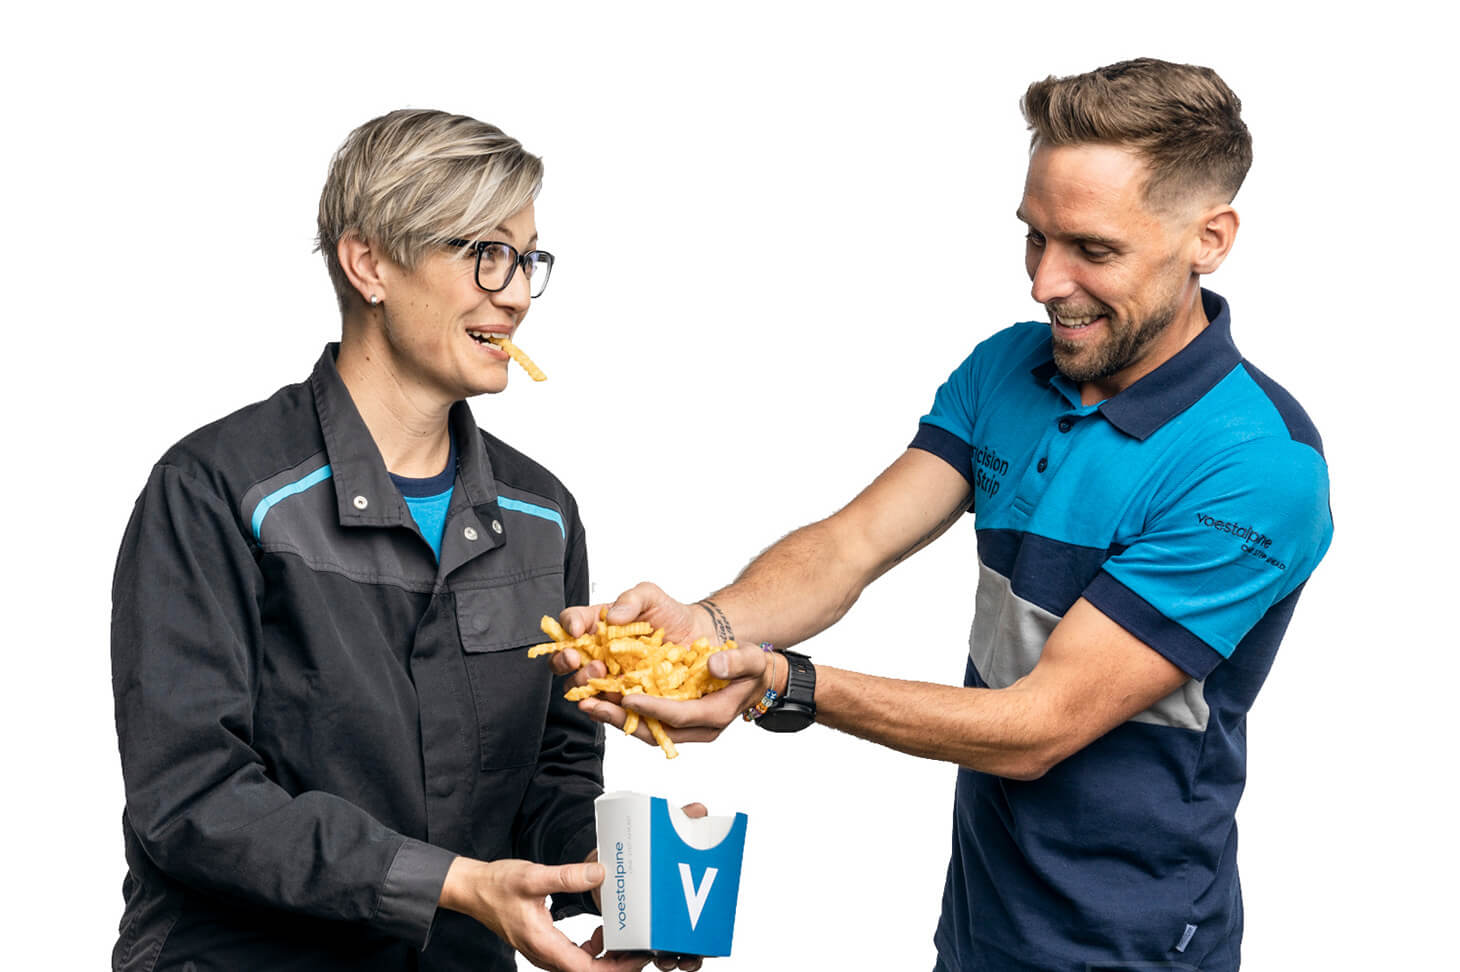 A man puts fries into a voestalpine cardboard box in the hands of a woman